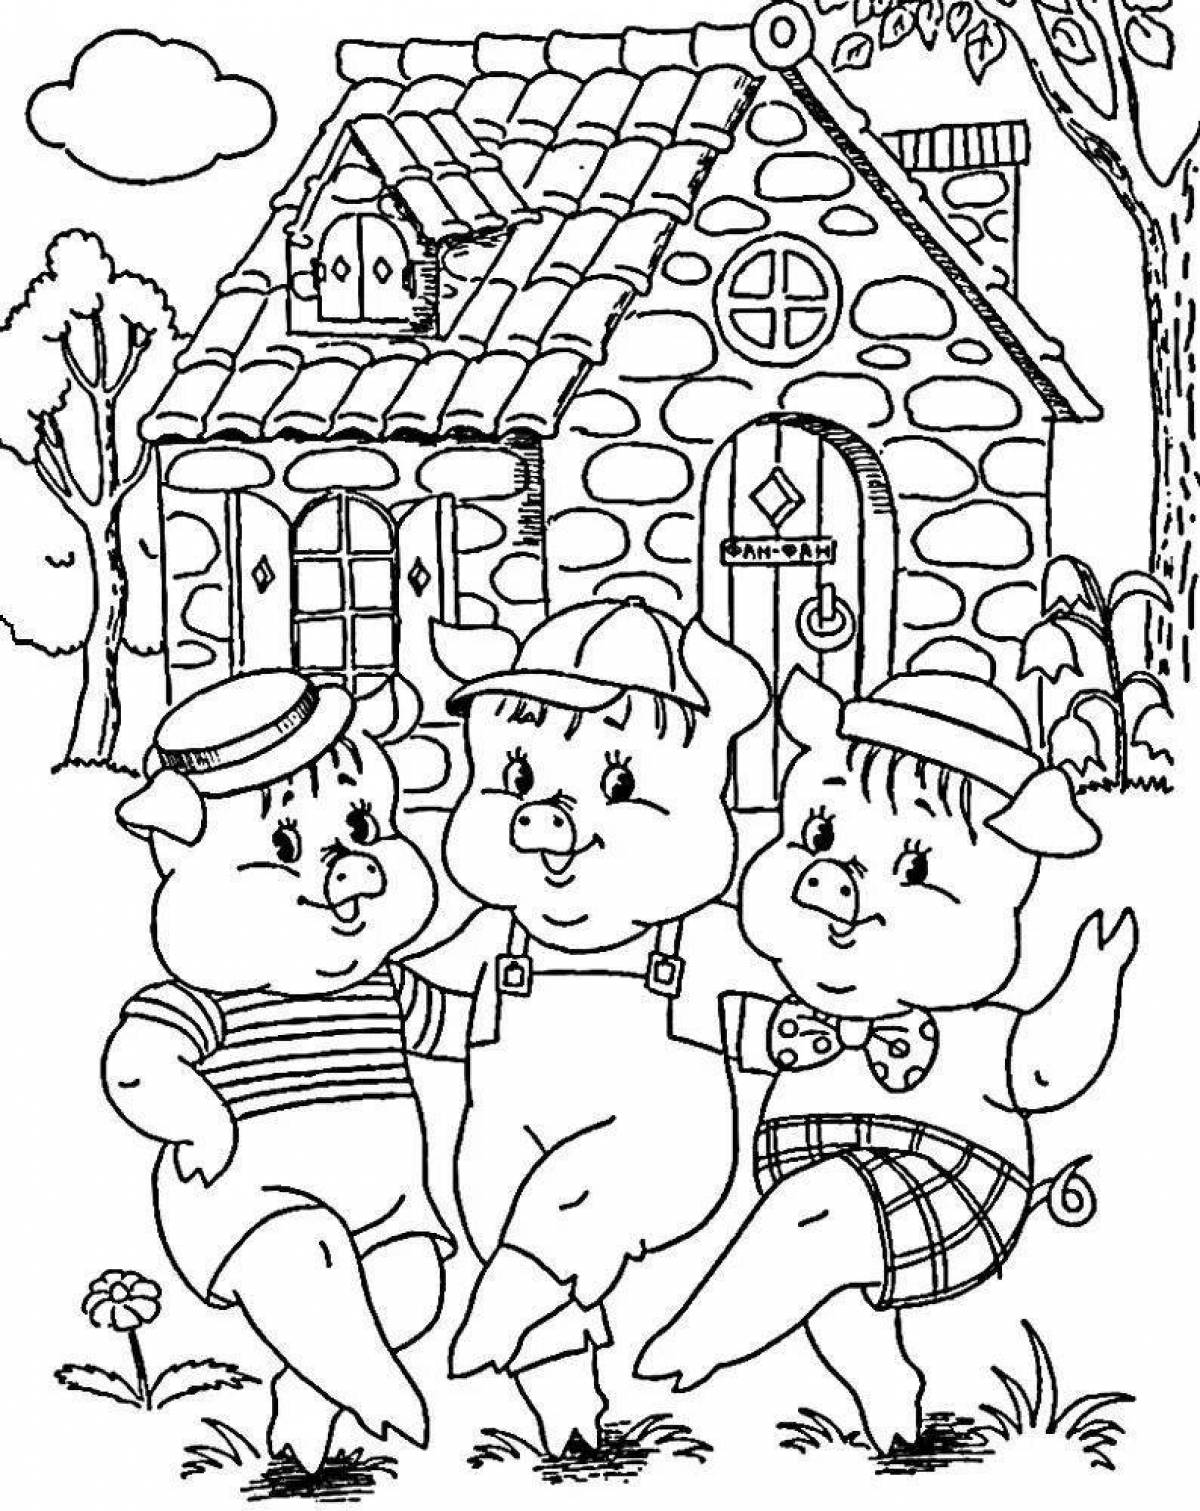 Funny coloring pages heroes of fairy tales